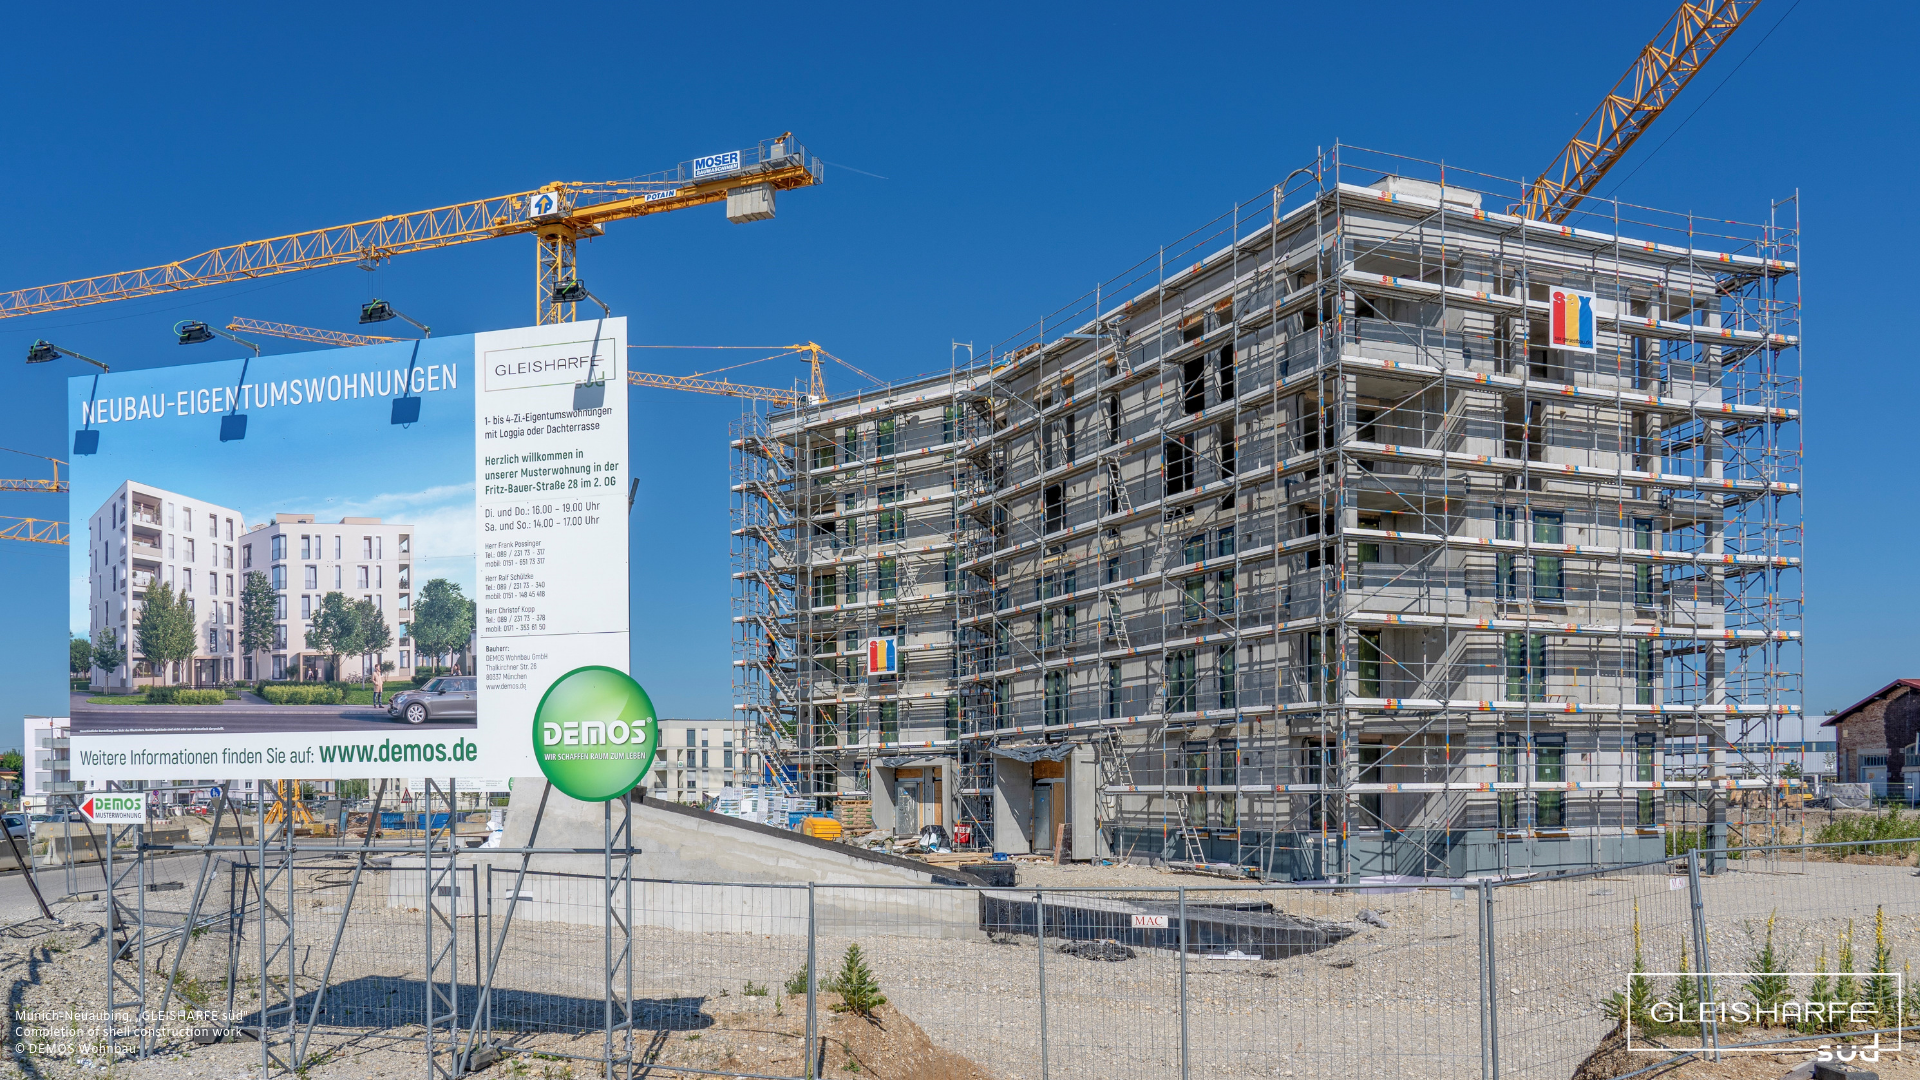 'GLEISHARFE süd' in Neuaubing: Completion of shell construction work